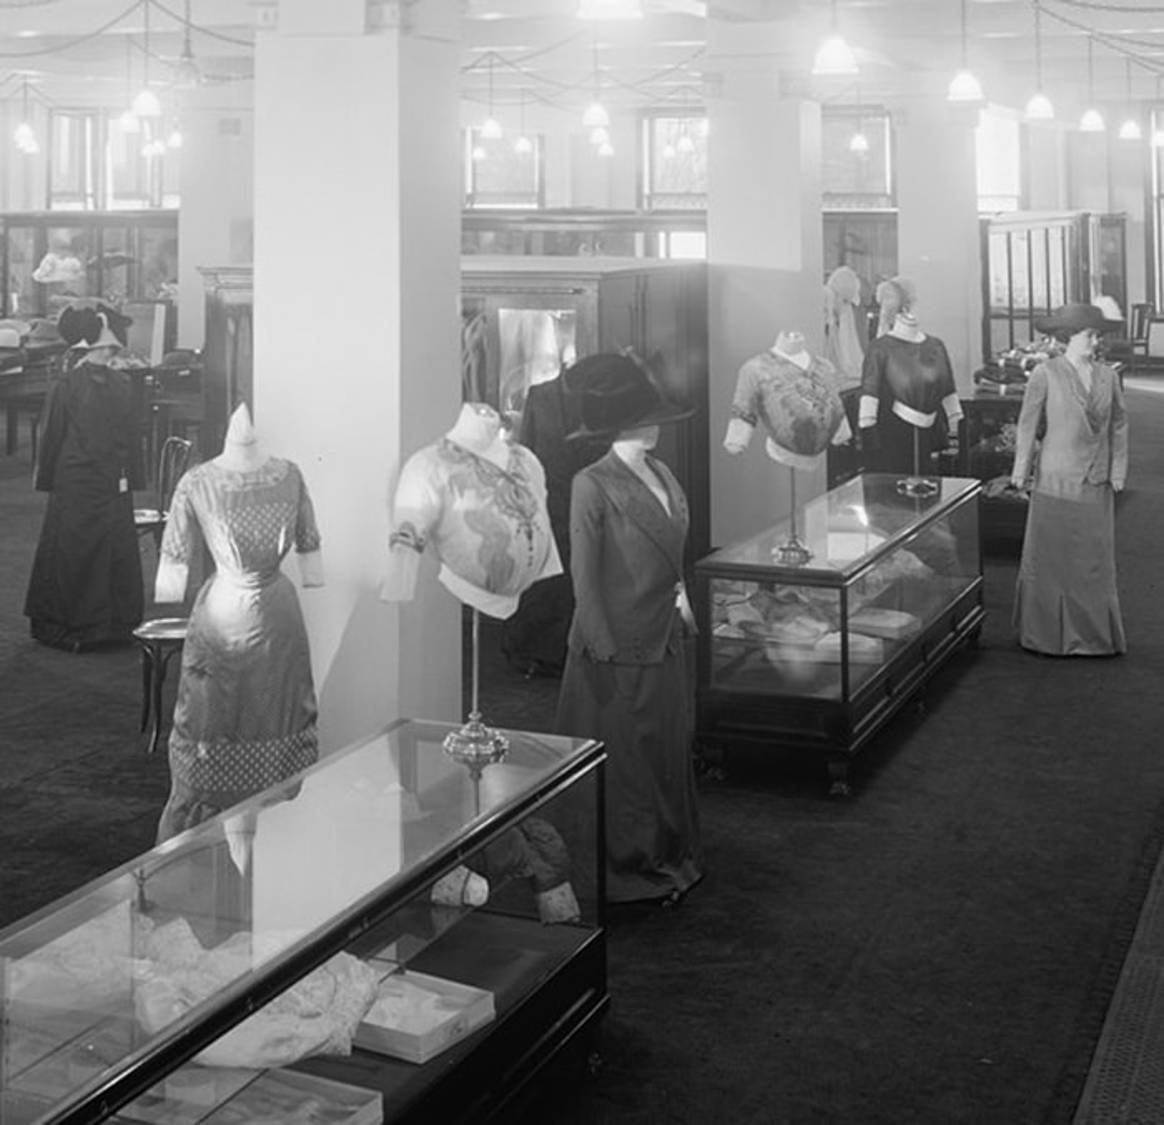 Mannequins: History, Trends, and Key Figures